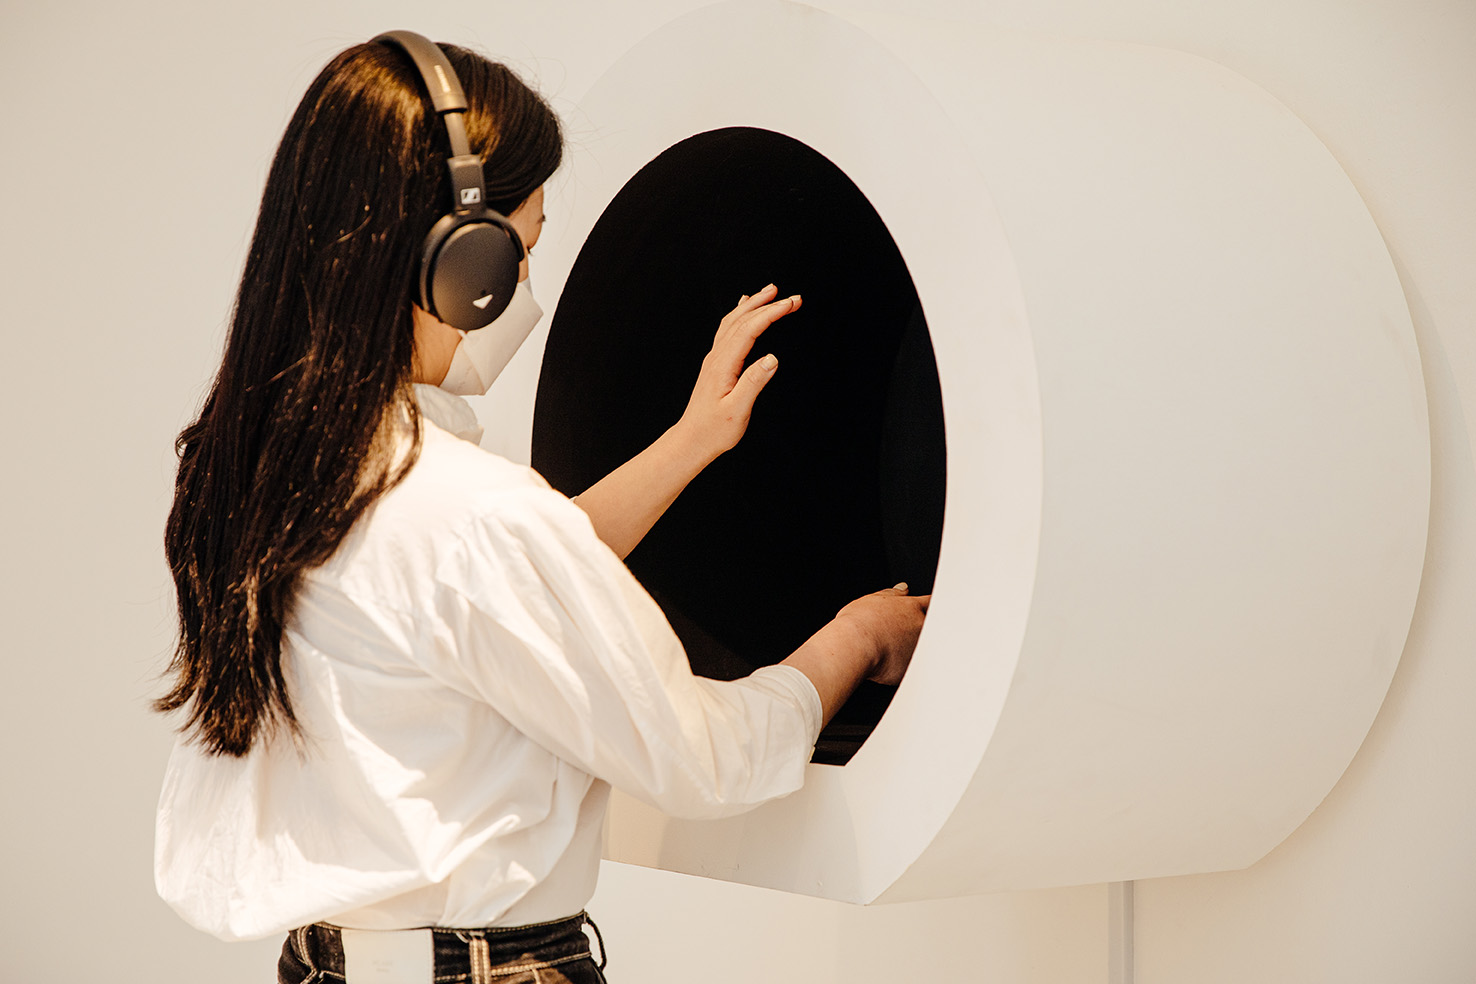 Person with headphones reaching arms into a round space in the wall